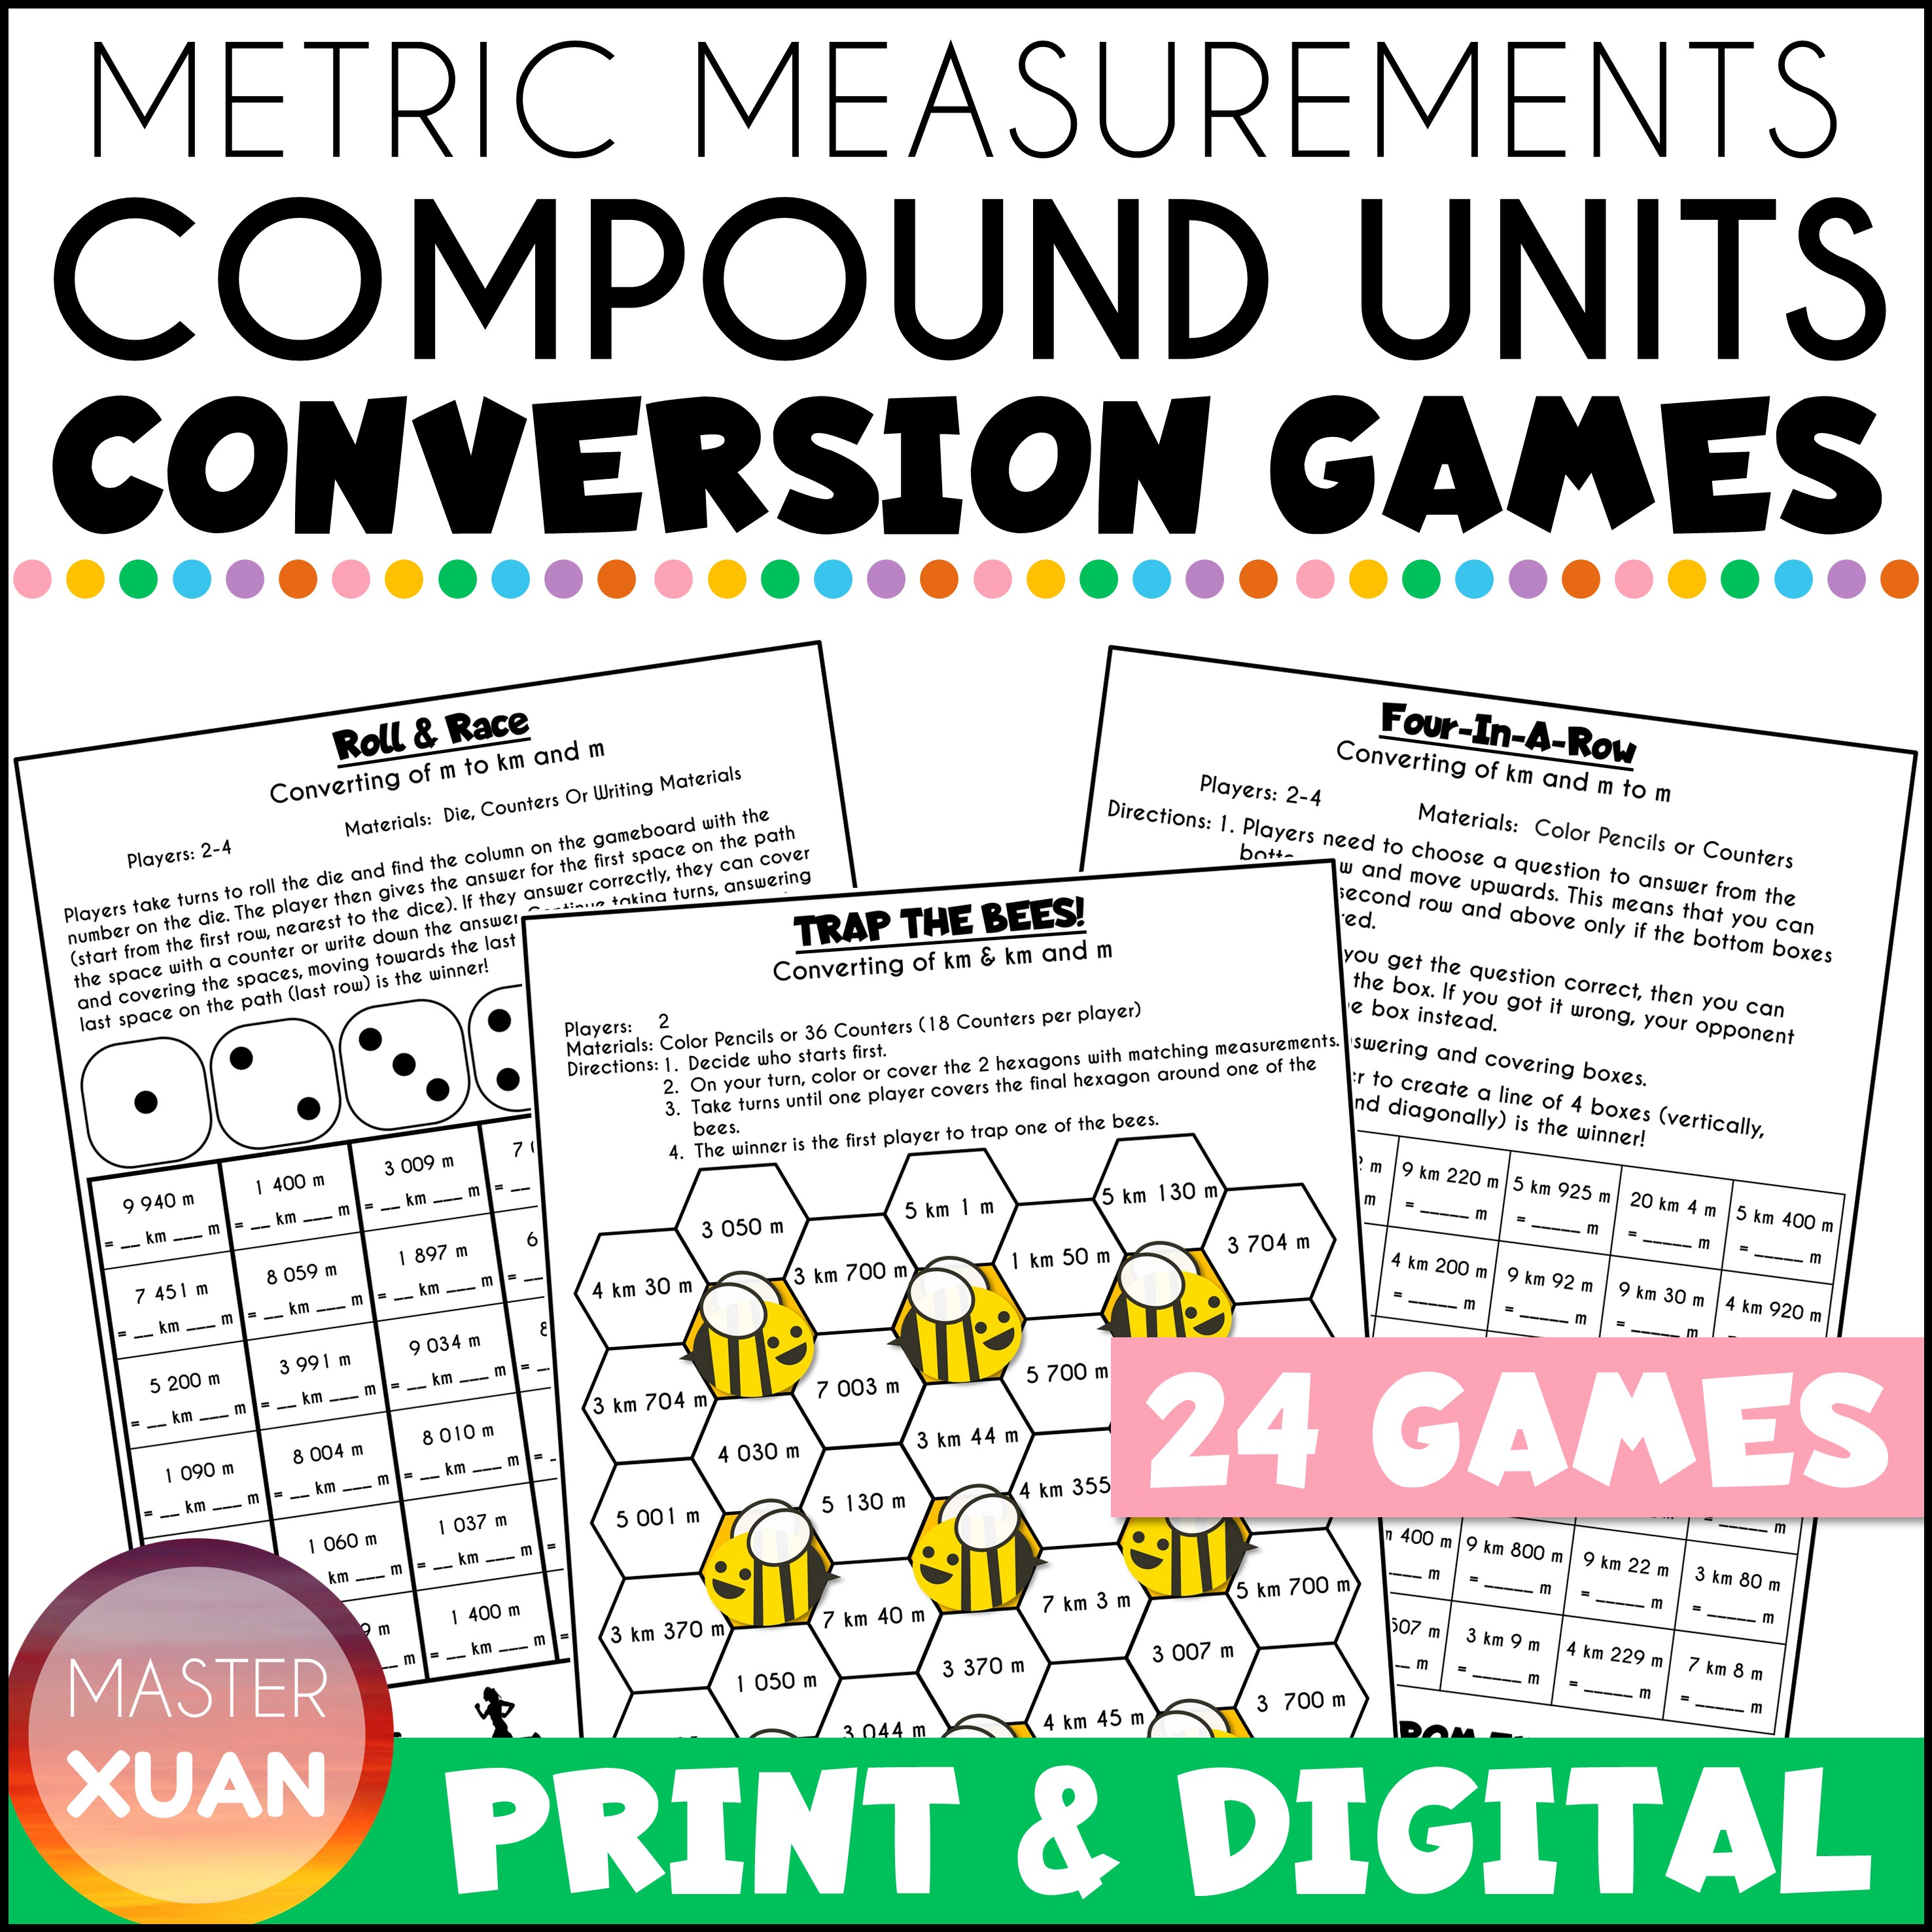 These 24 metric conversions games are fun and engaging!